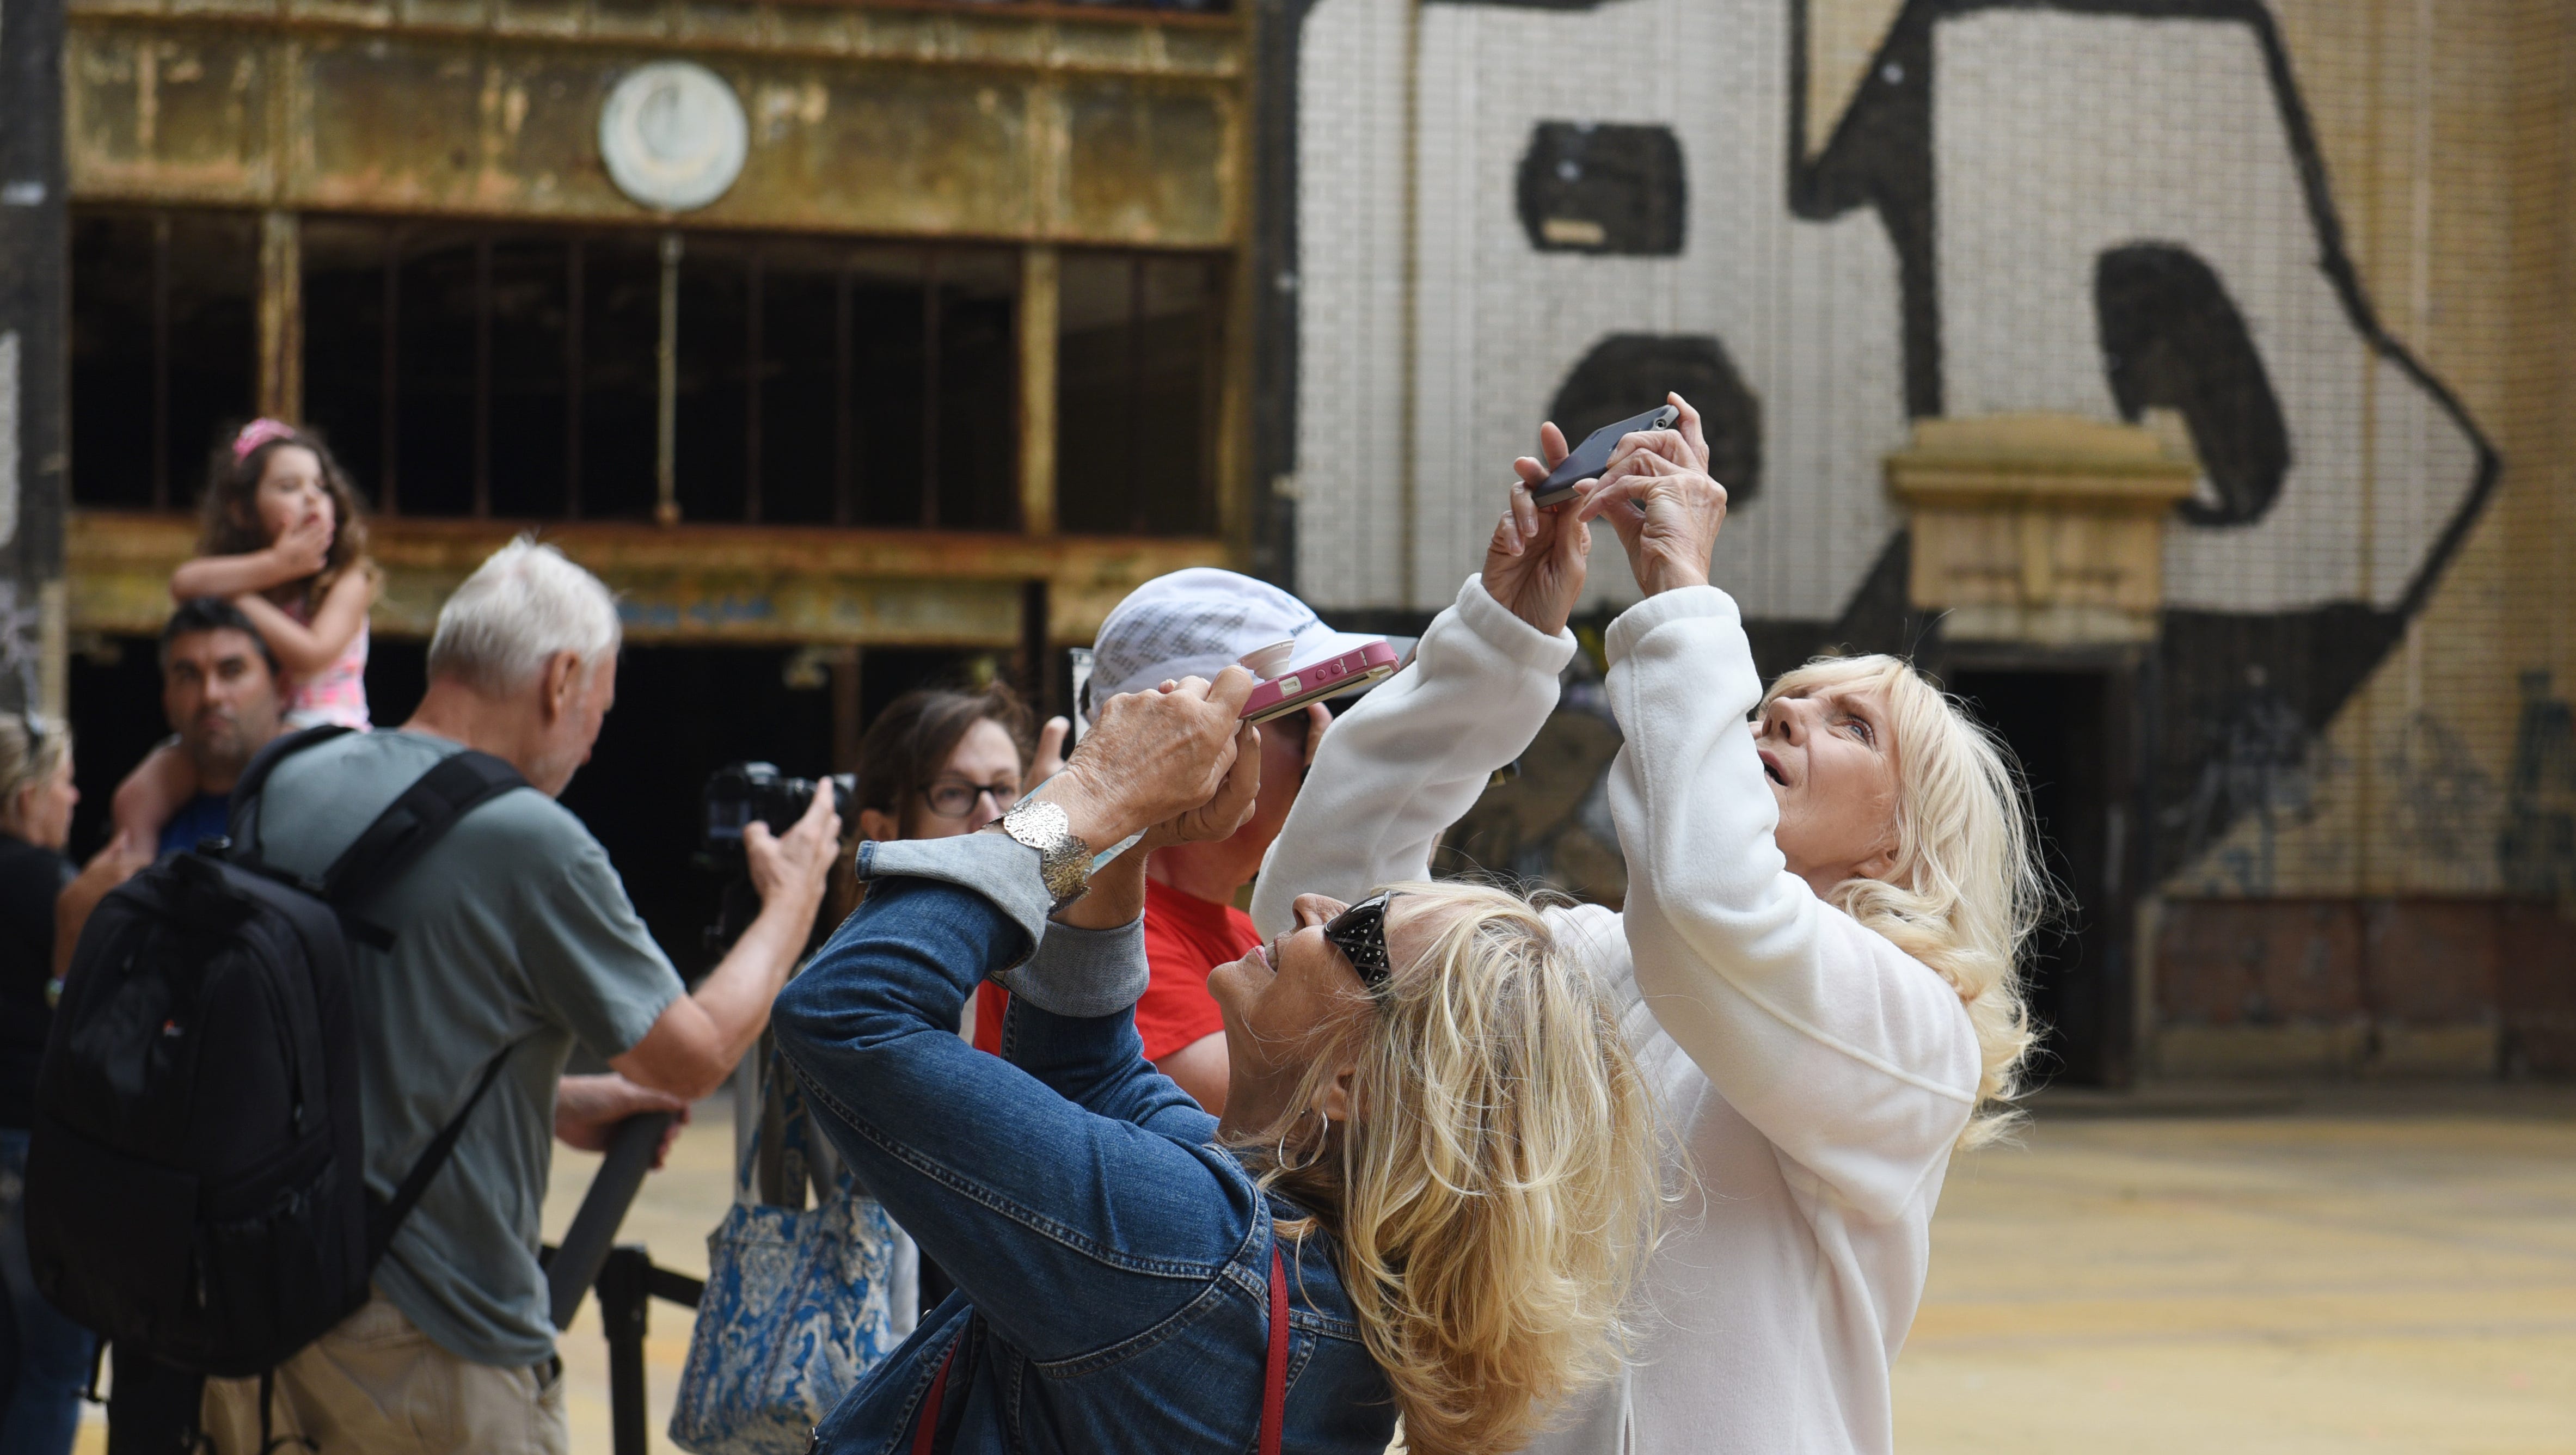 Terri Schroeder, left, and Barbara Vanerboget of Canton point their cameras skyward during an open house at the Michigan Central Train Depot.